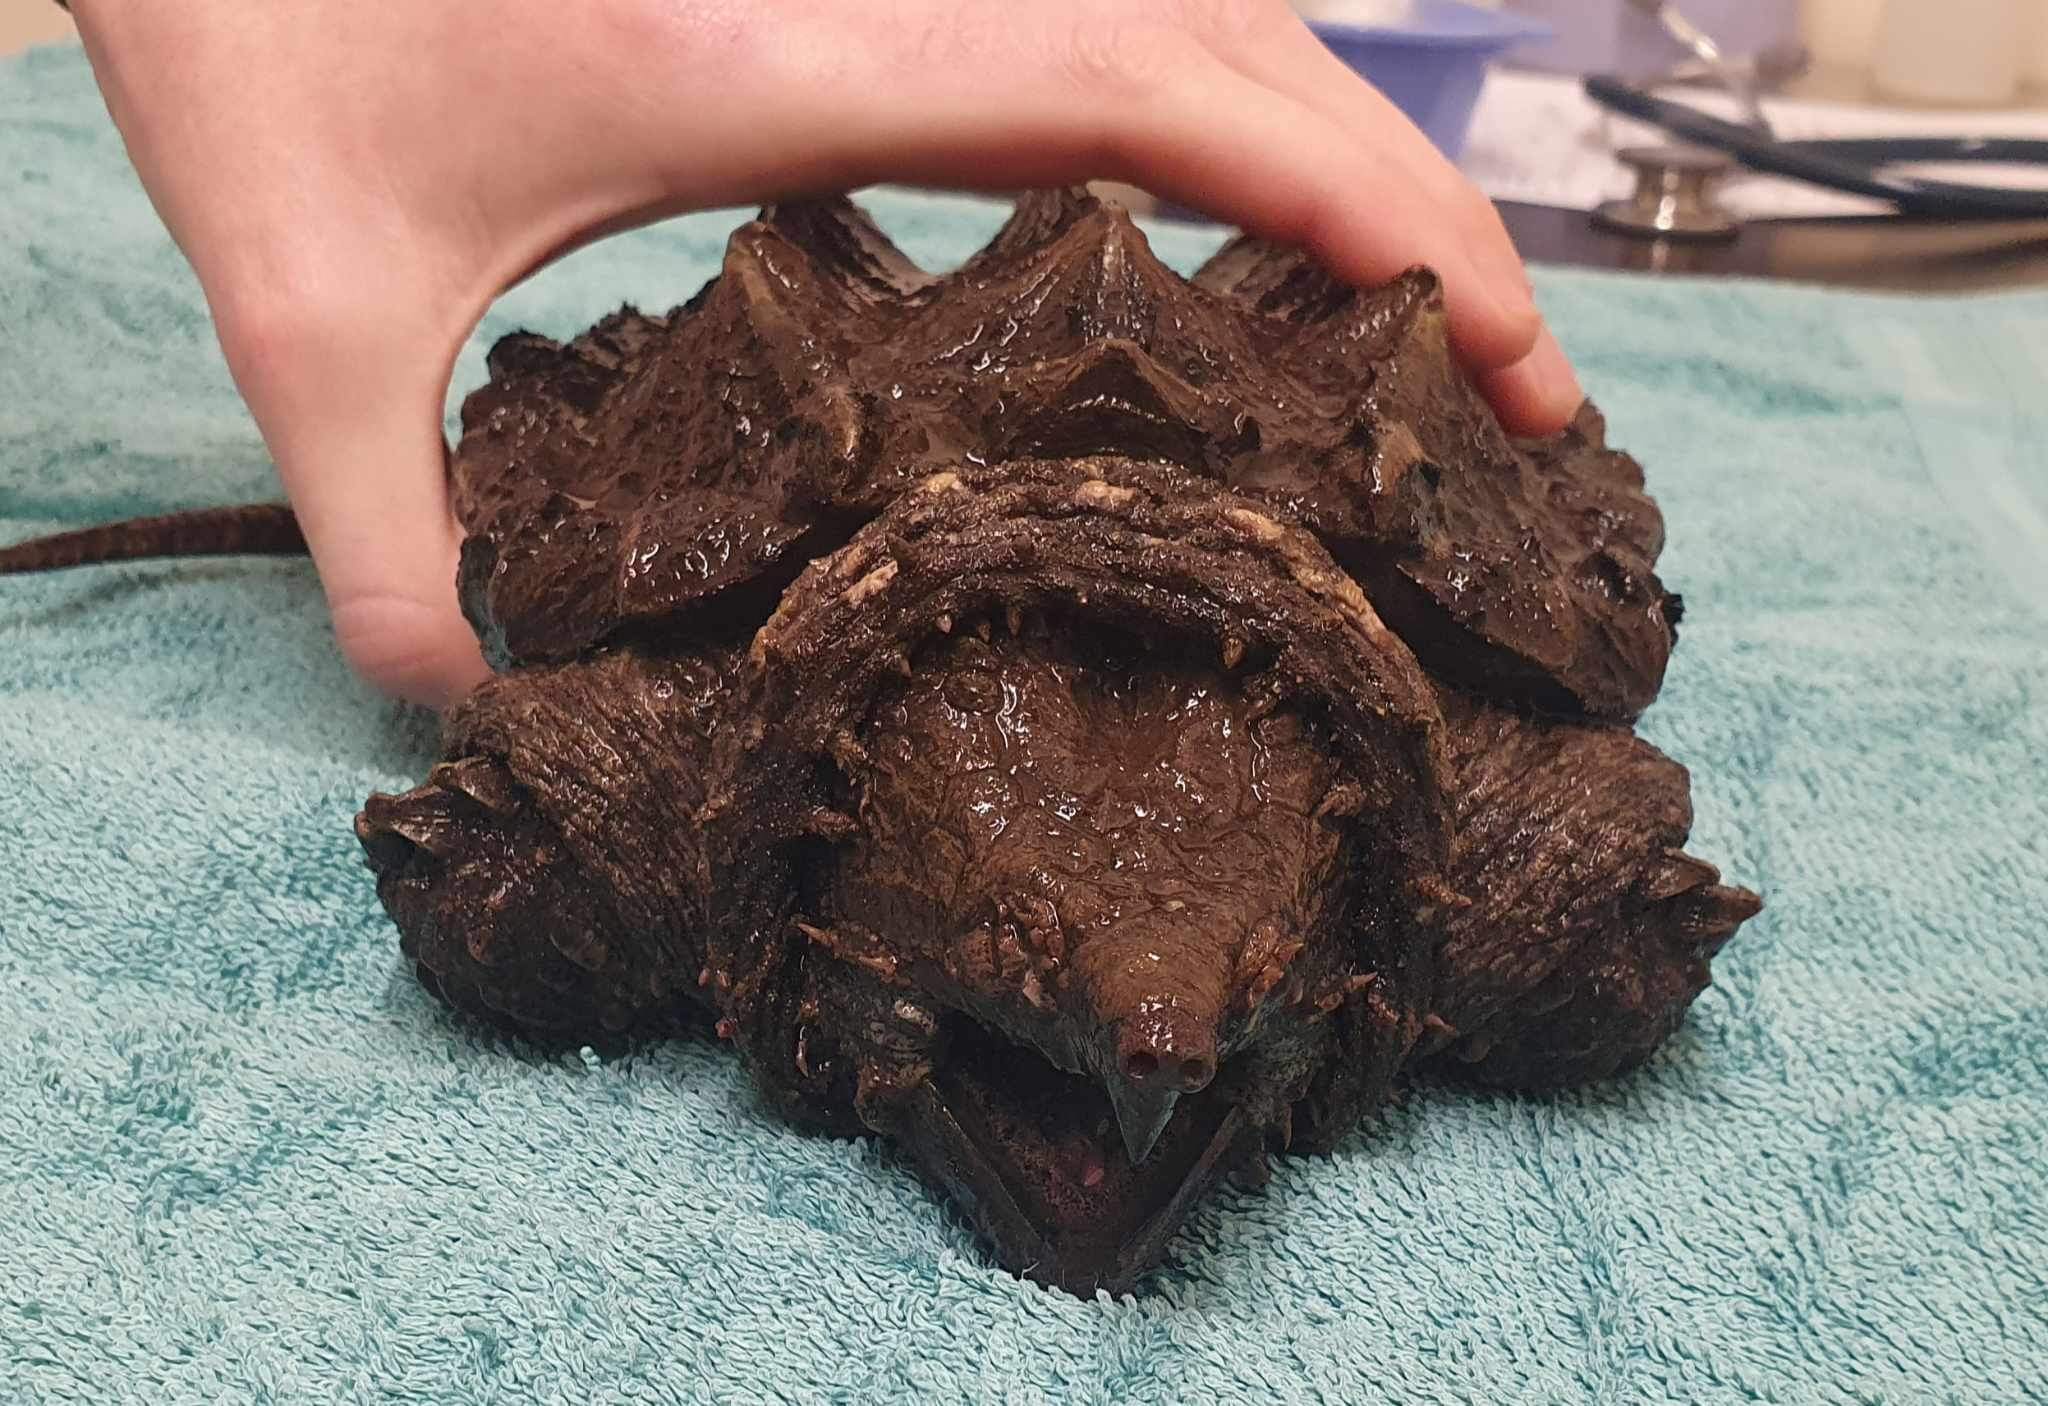 A photo of the alligator snapping turtle lying on a towel 